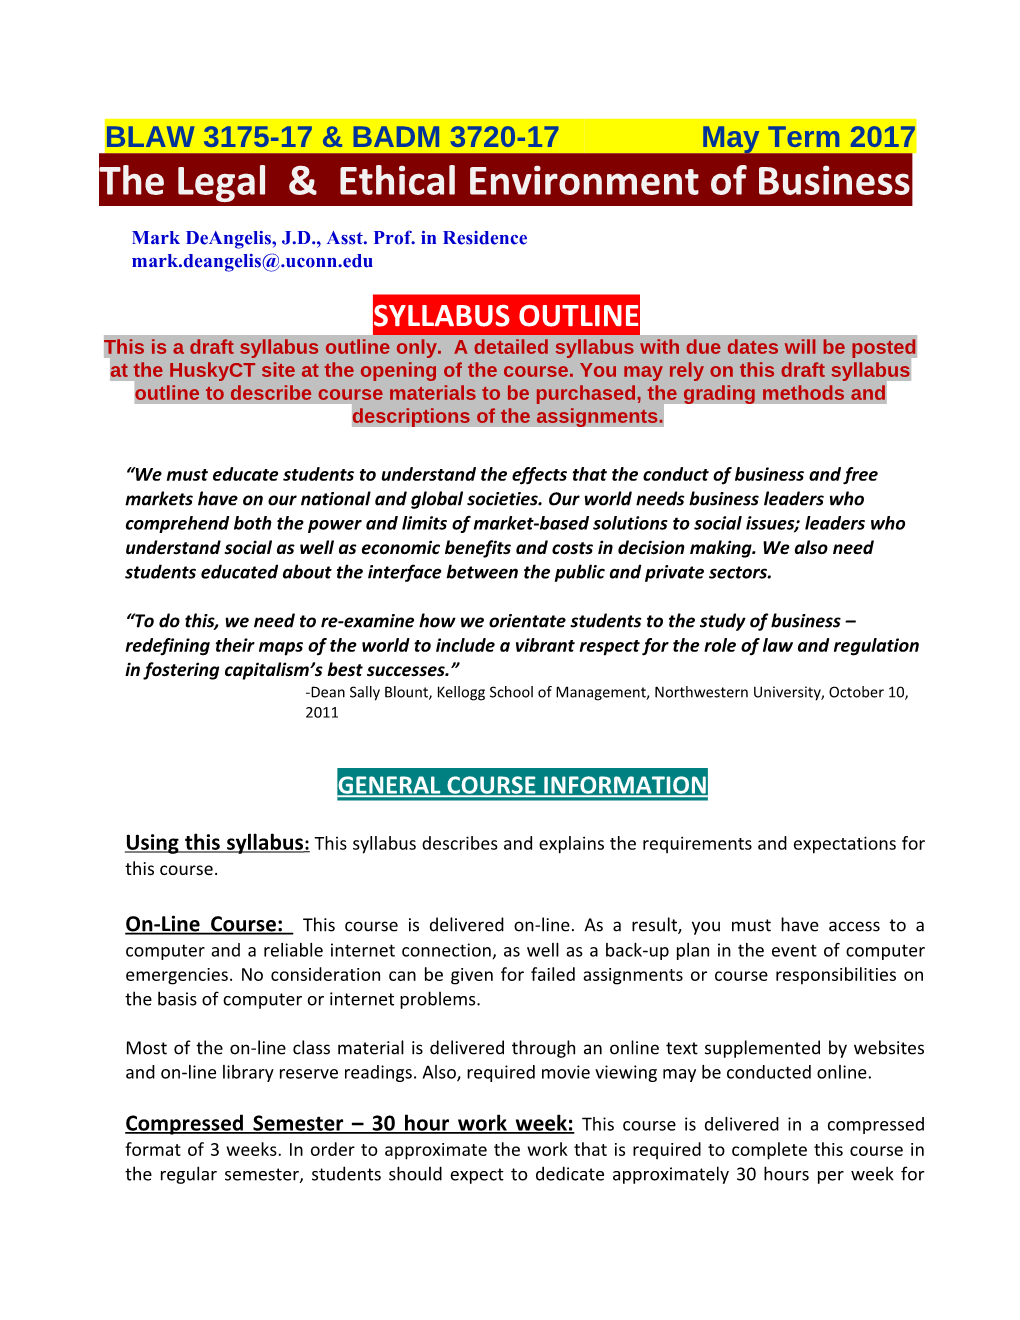 The Legal Ethical Environment of Business